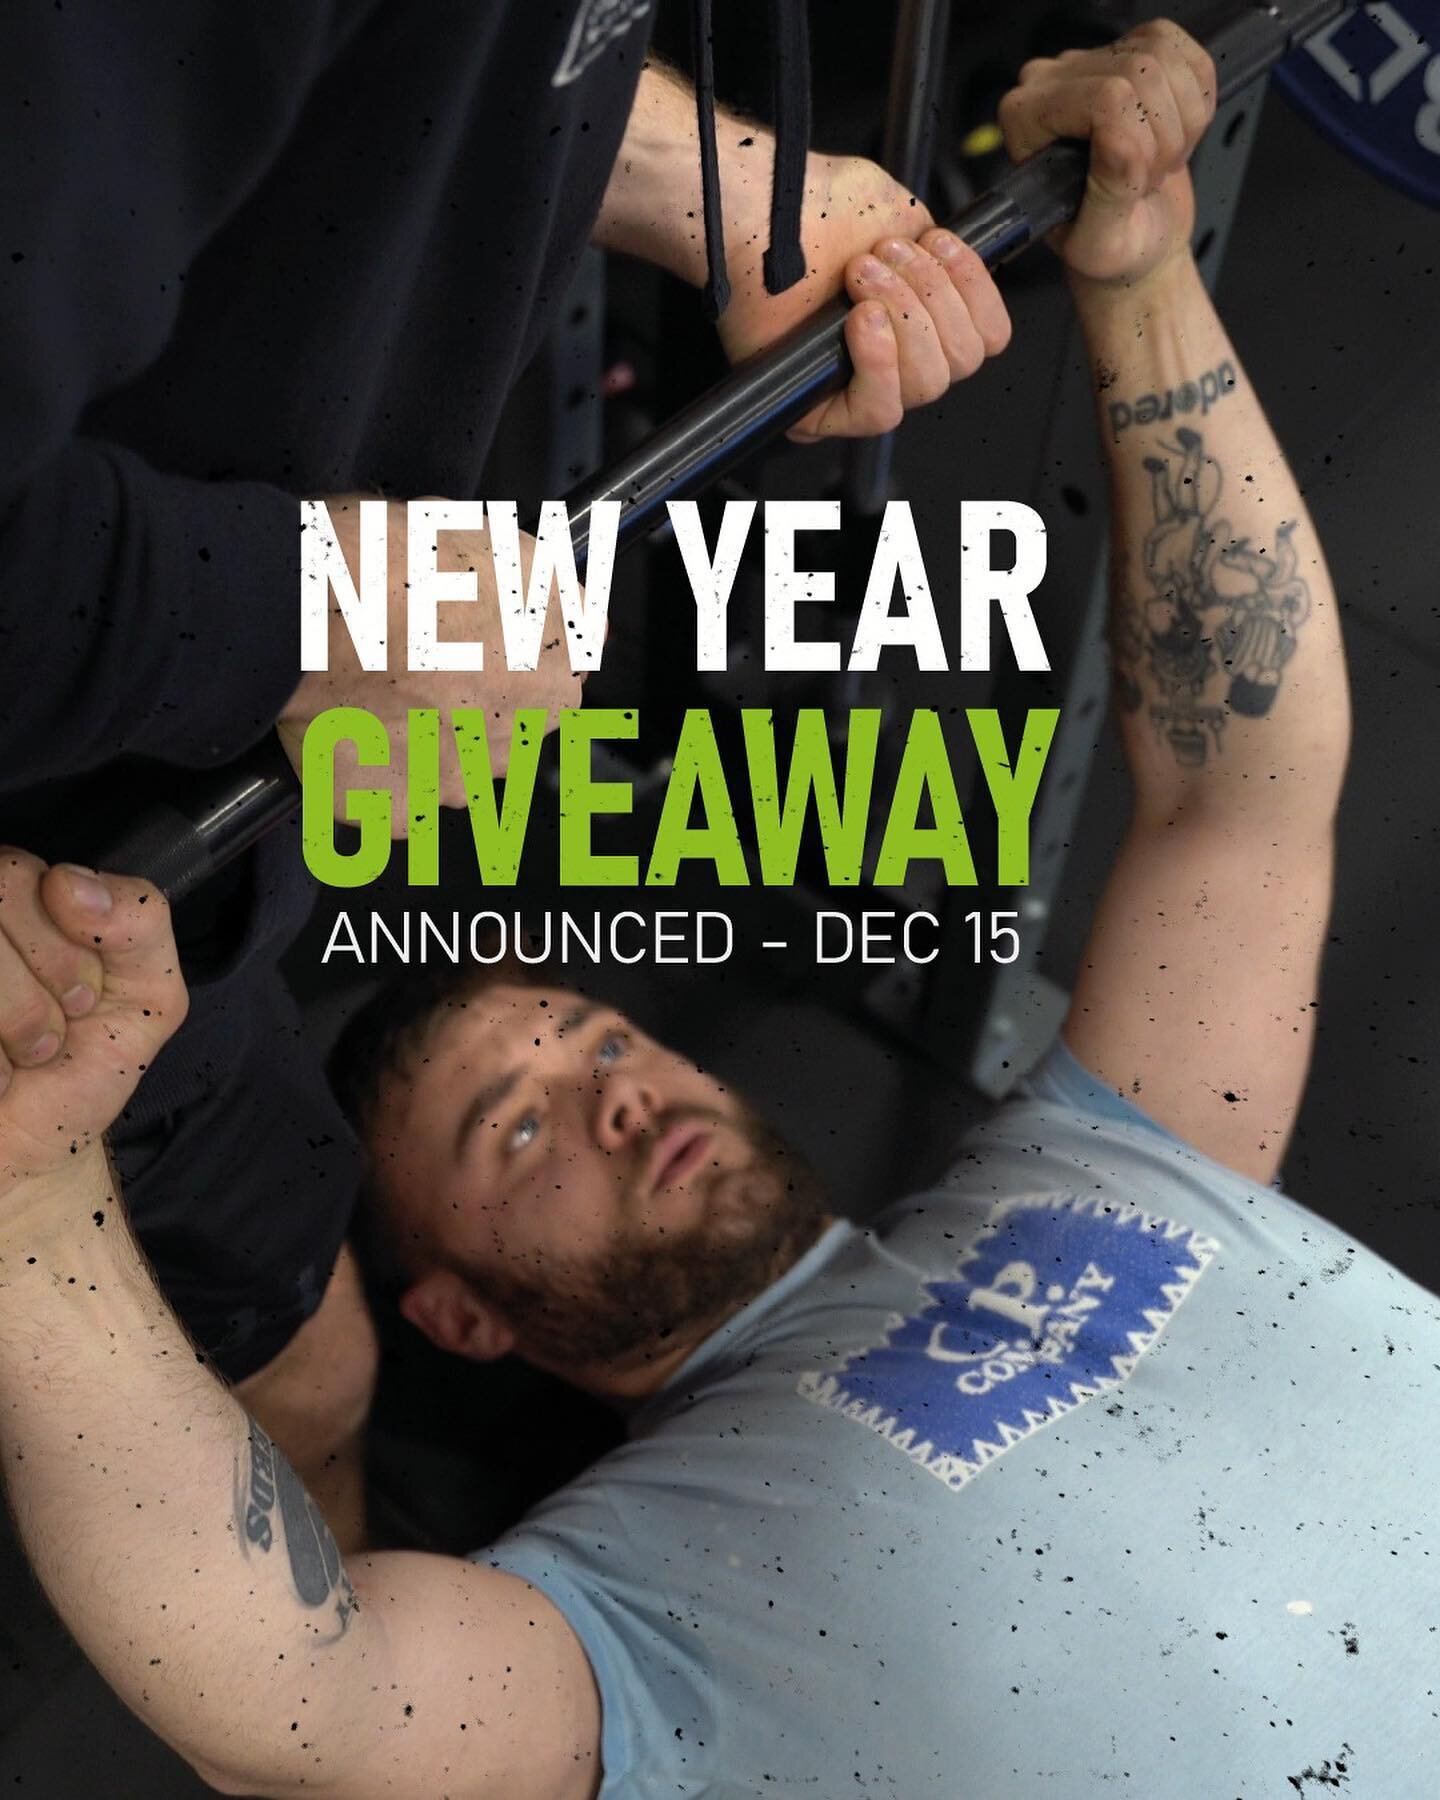 THE GIVEAWAY FOR THE NEW YEAR 🎄🎄🎄🎄

we're giving away a ridicolous prize for our December giveaway this year...

3 months of our small group personal training membership.

3 PT sessions per week
Unlimtied class access
Nutritional support for your